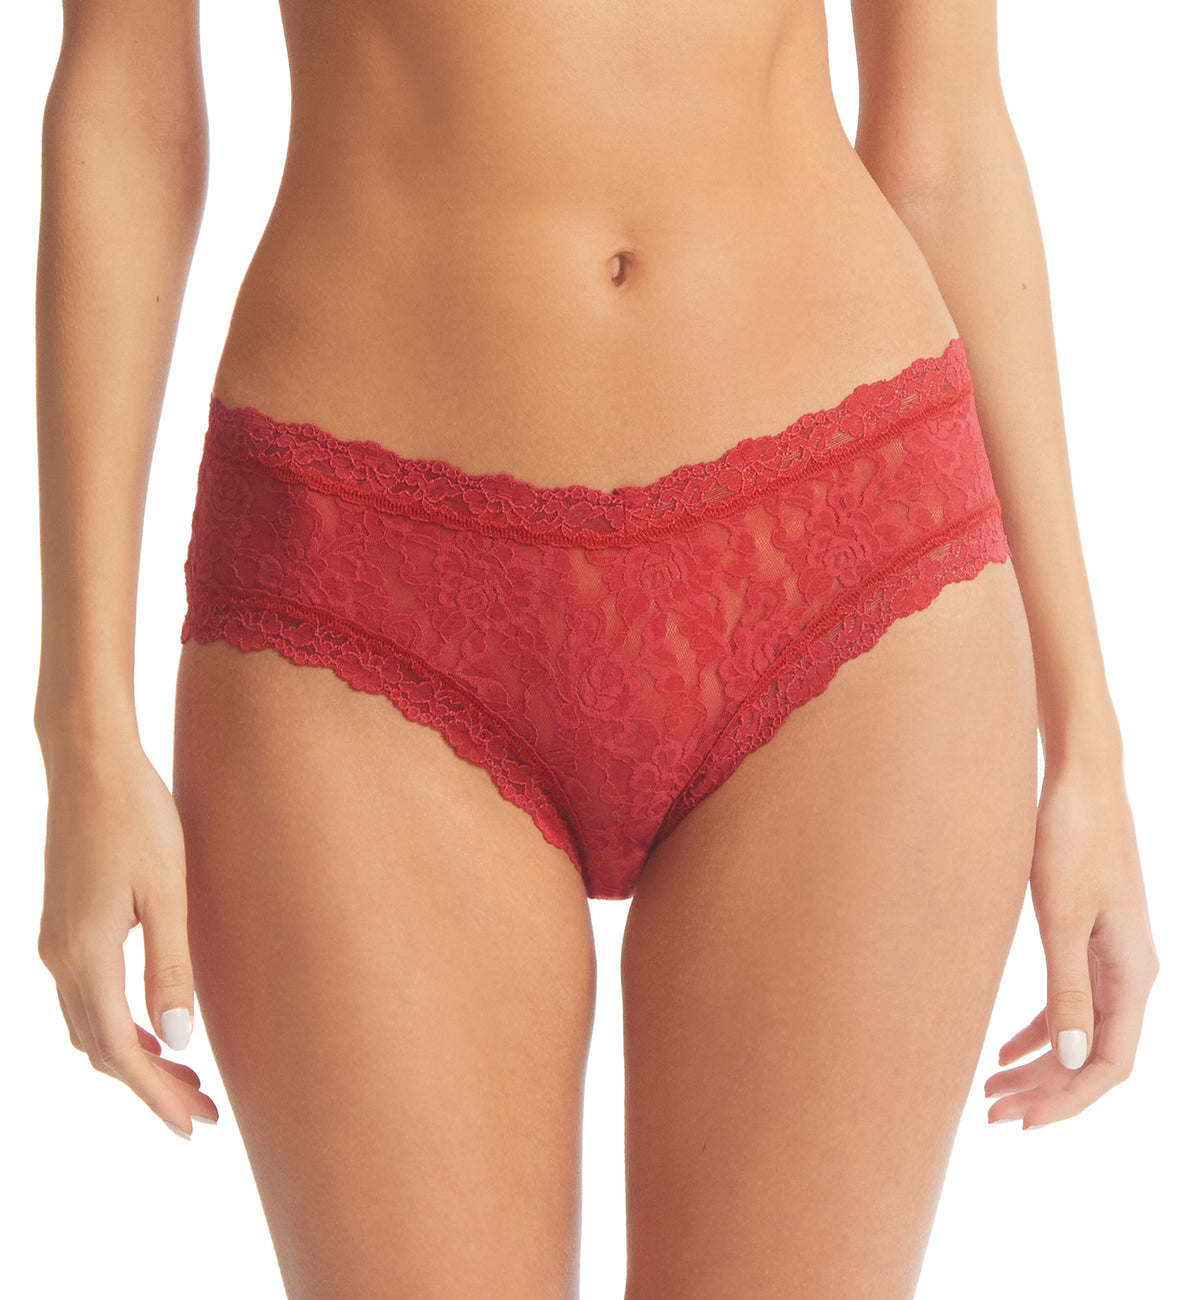 Hanky Panky Signature Lace V-Front Cheeky Brief (482454),XS,Burnt Sienna - Burnt Sienna,XS